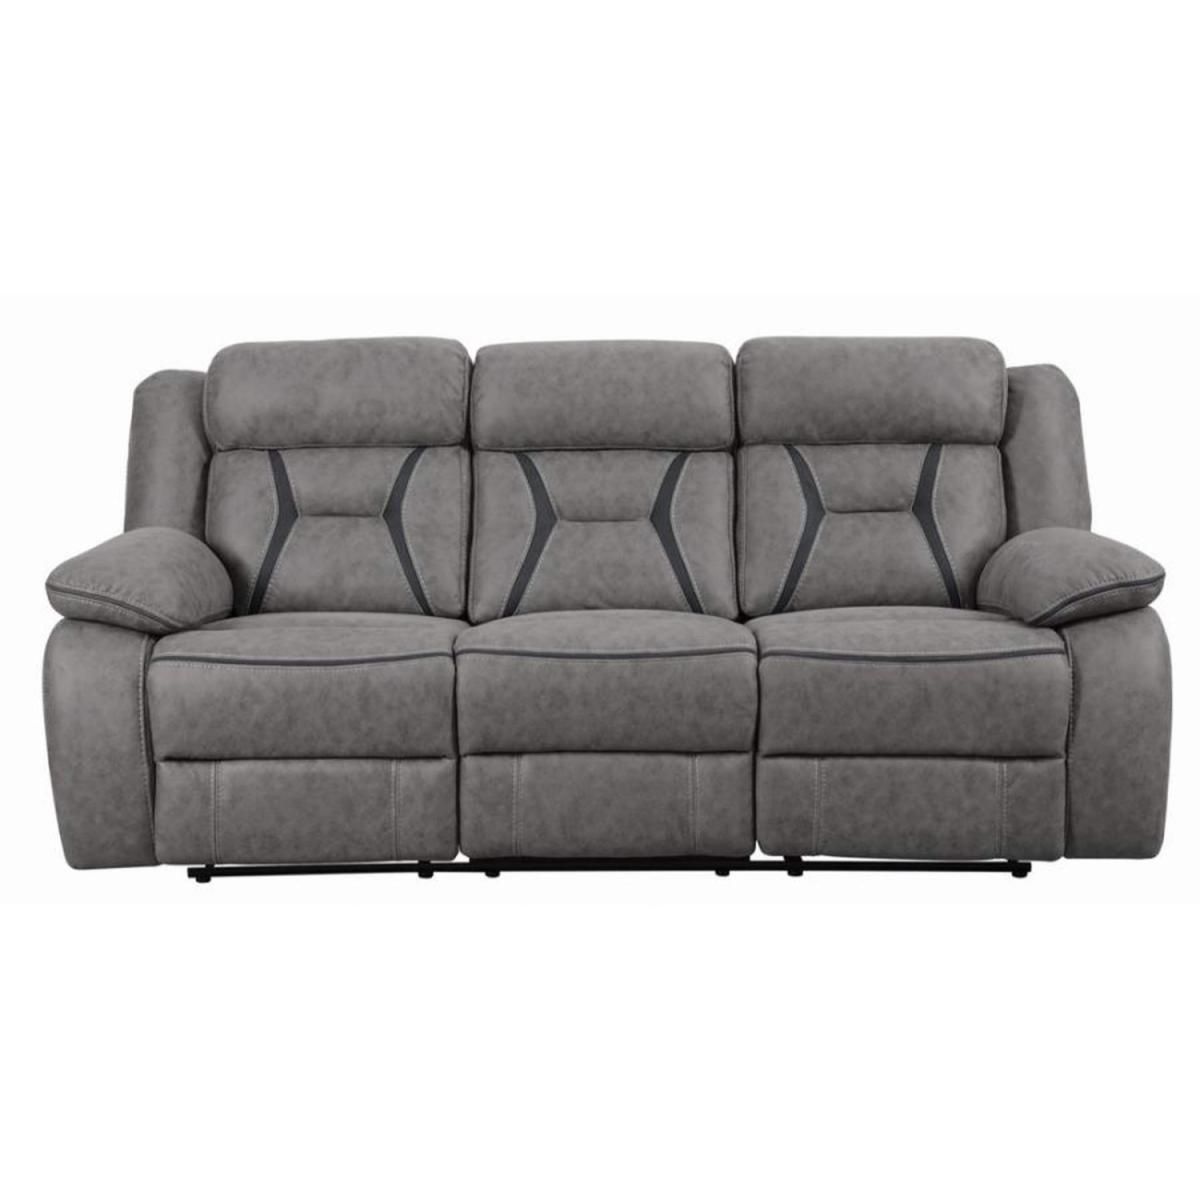 SILLON RECLINABLE HIGGINS 3 PERS. GRIS